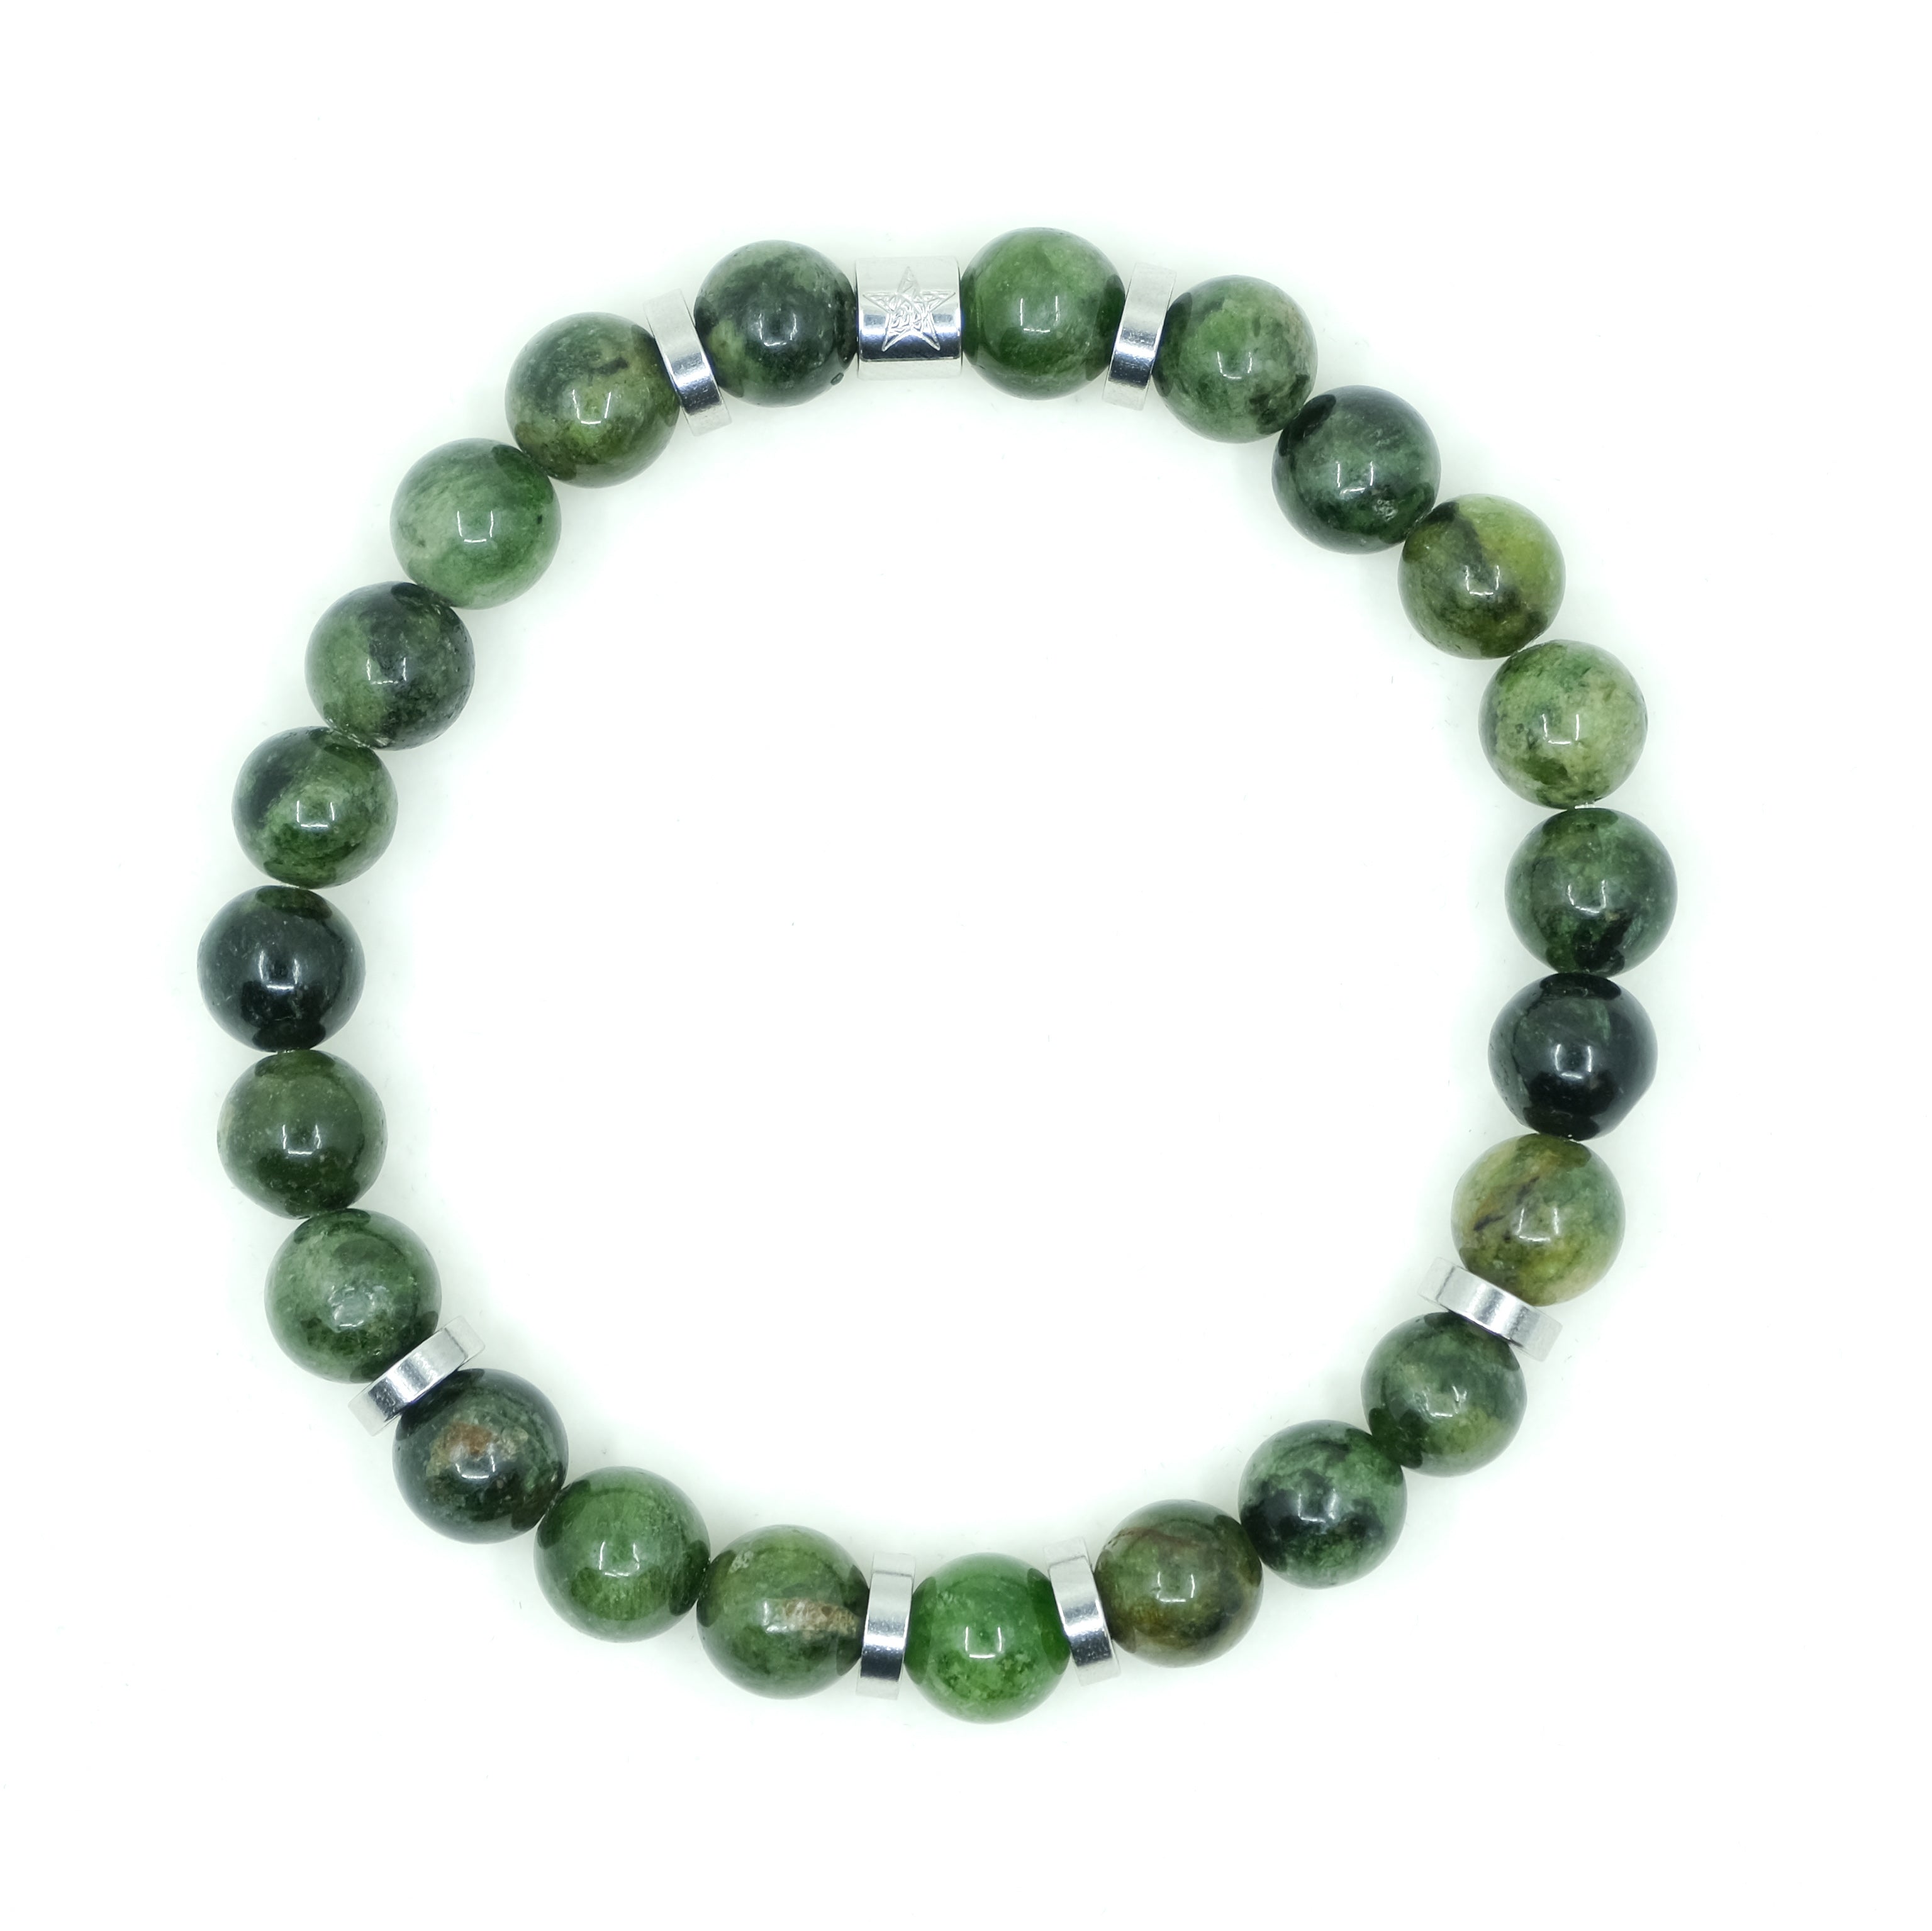 Diopside gemstone bracelet with stainless steel accessories from above